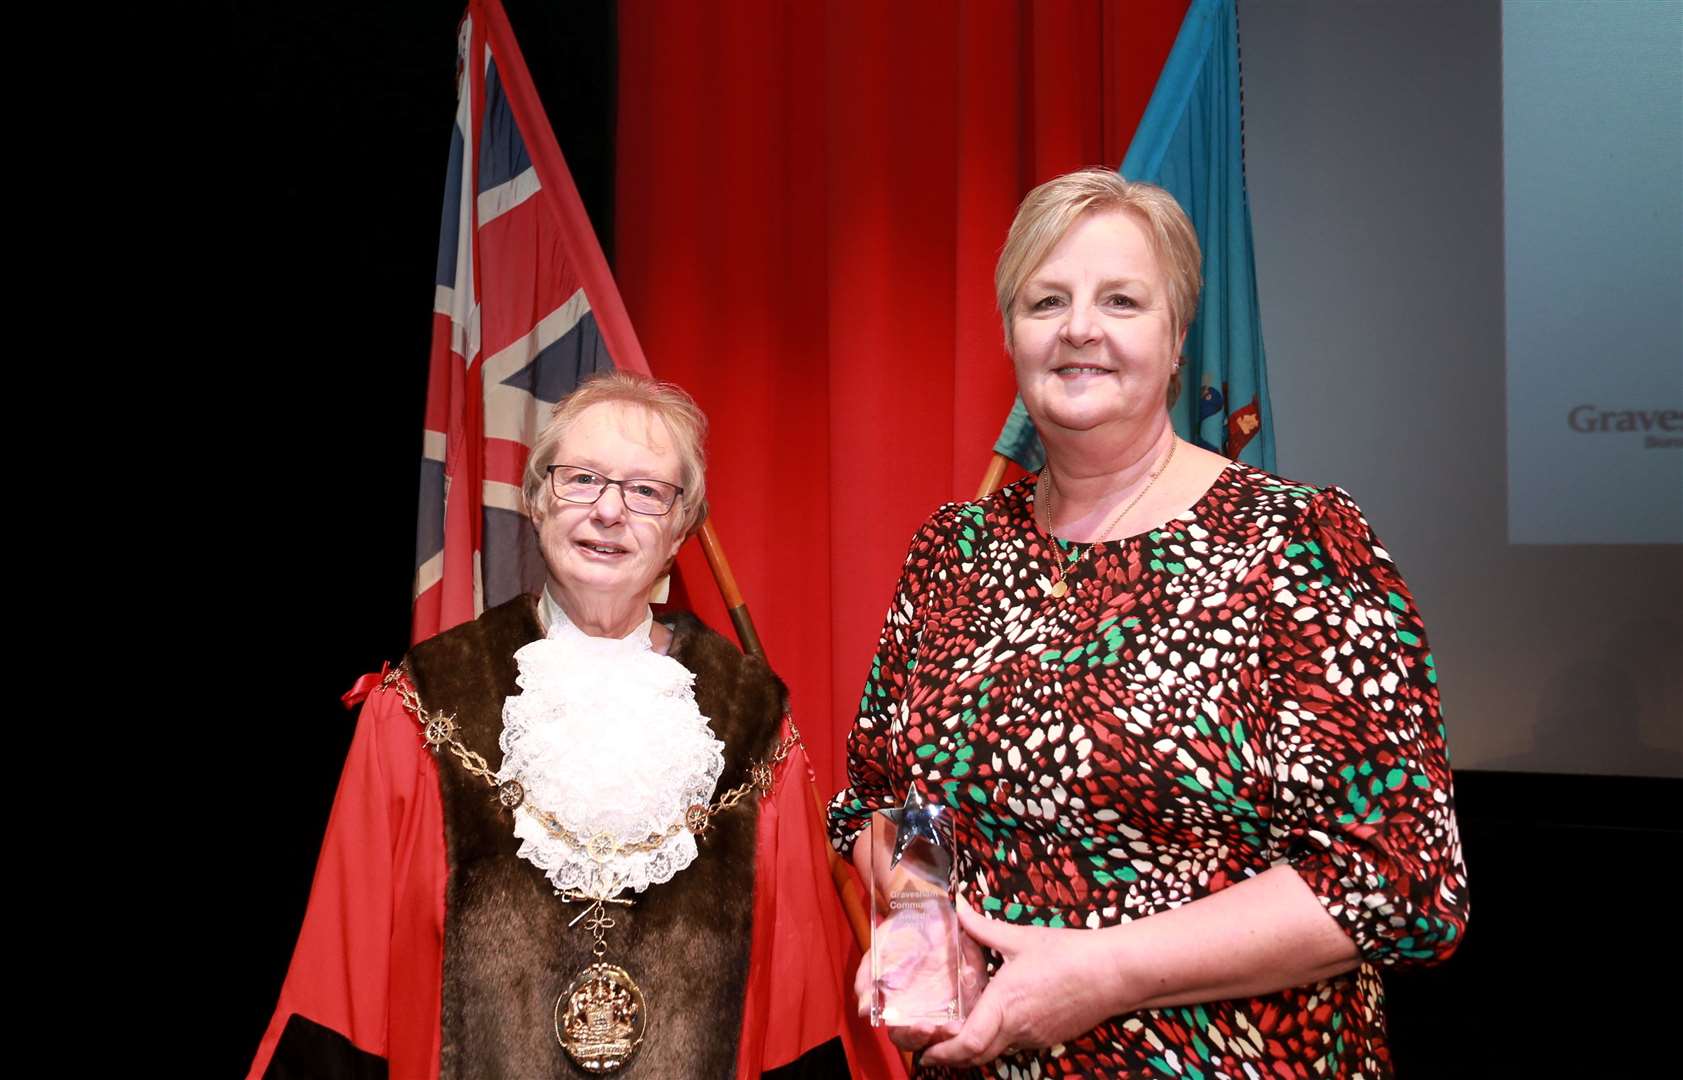 Suzanne Wood, a volunteer with ellenor Hospice, was among those honoured. Pictures Phil Lee/Gravesham council